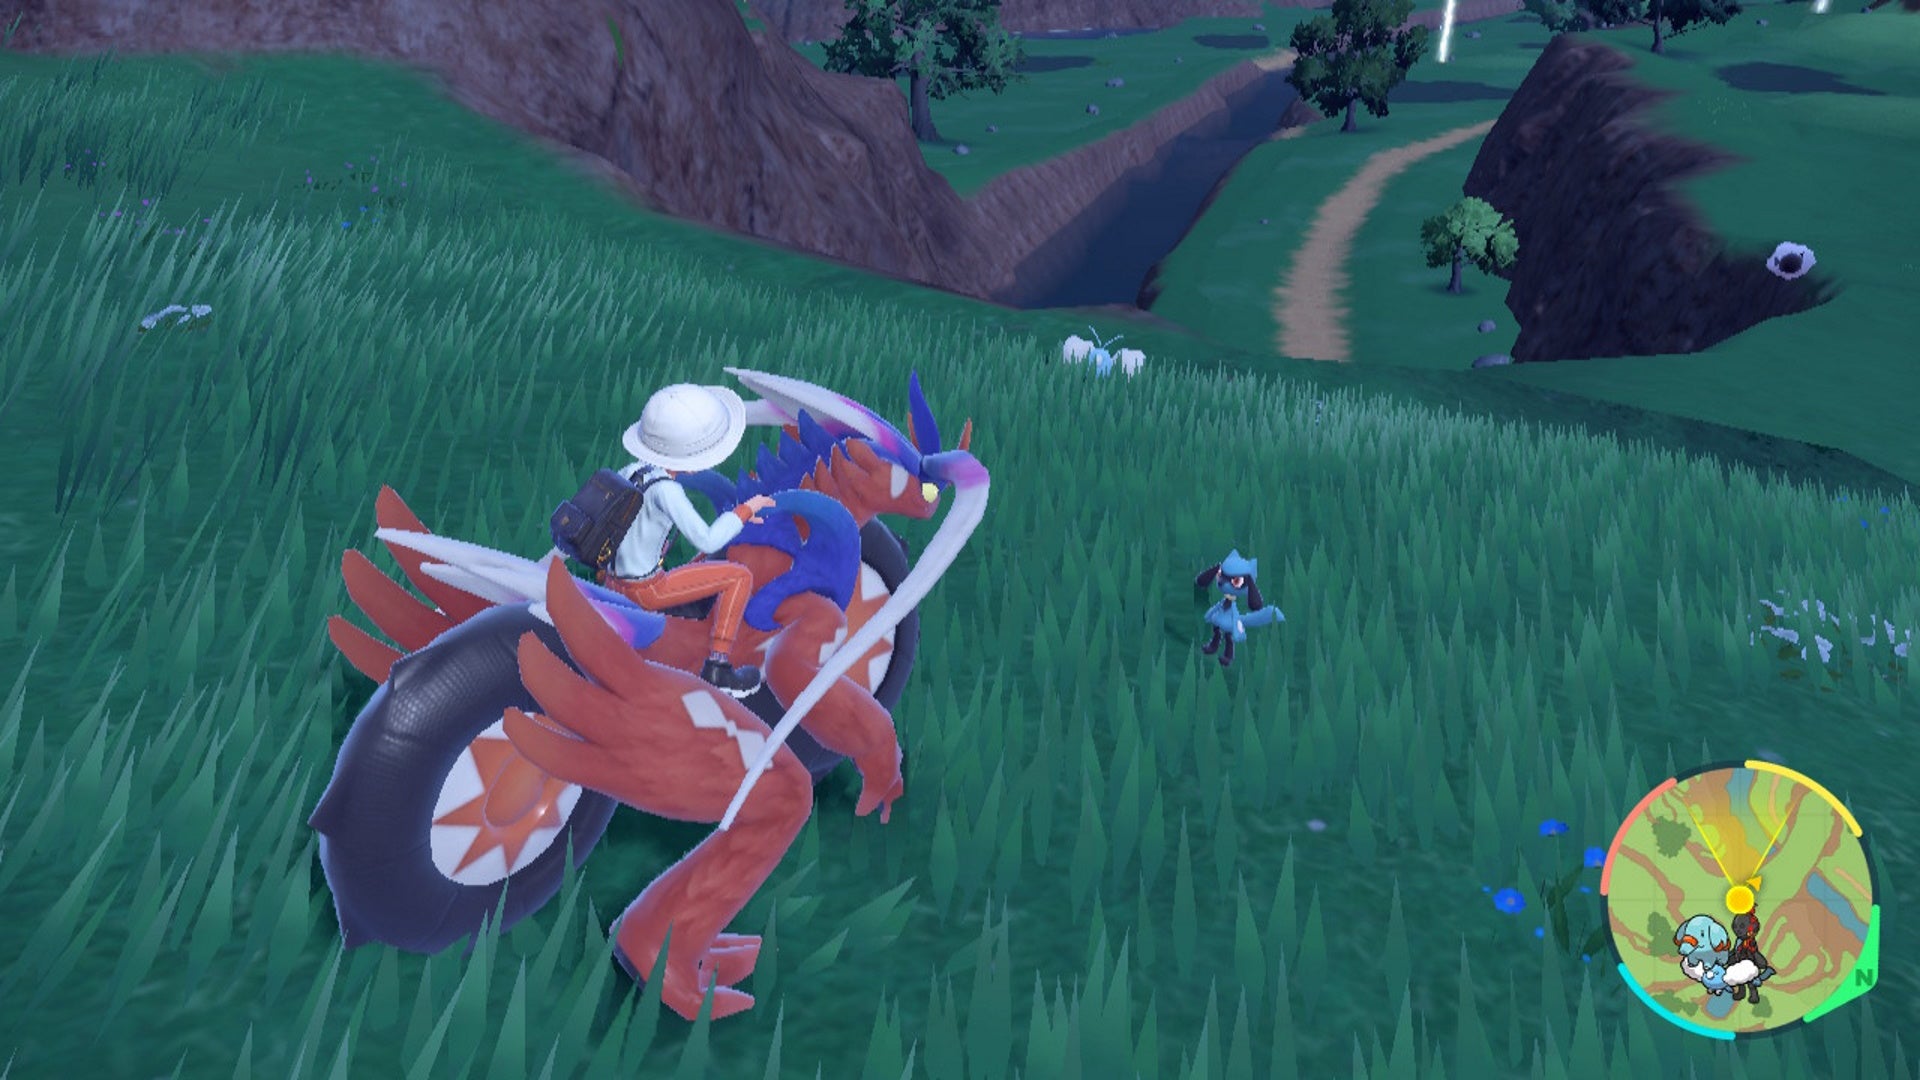 How to get Riolu in Scarlet and Violet: An anime child sitting on a large red lizard in a field is looking at a small blue and black creature with floppy ears